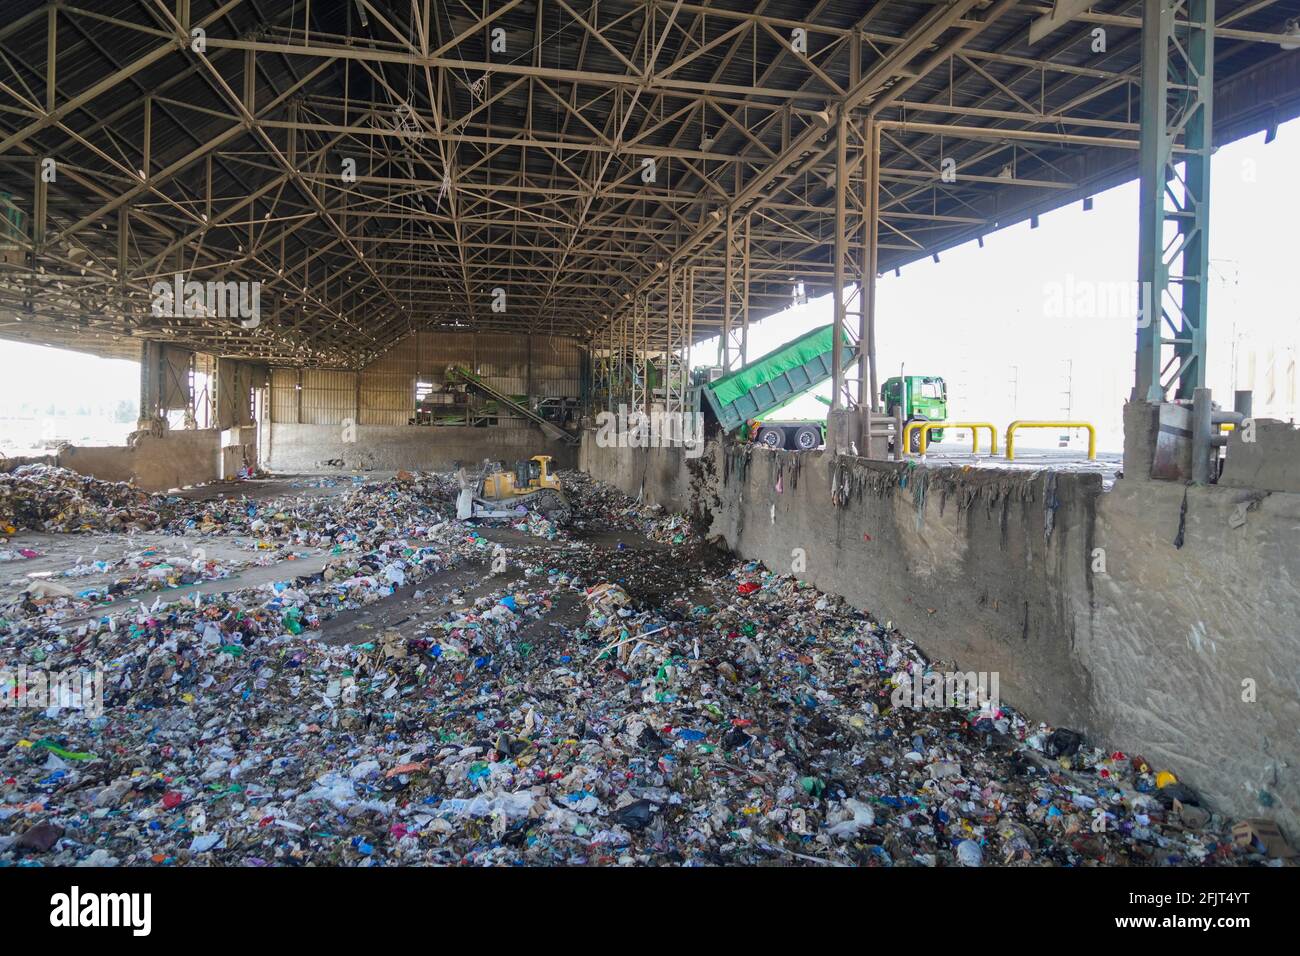 Domestic waste treatment centre. The waste dumped here after collection is sorted and processed using a specially designed mechanical biological treat Stock Photo